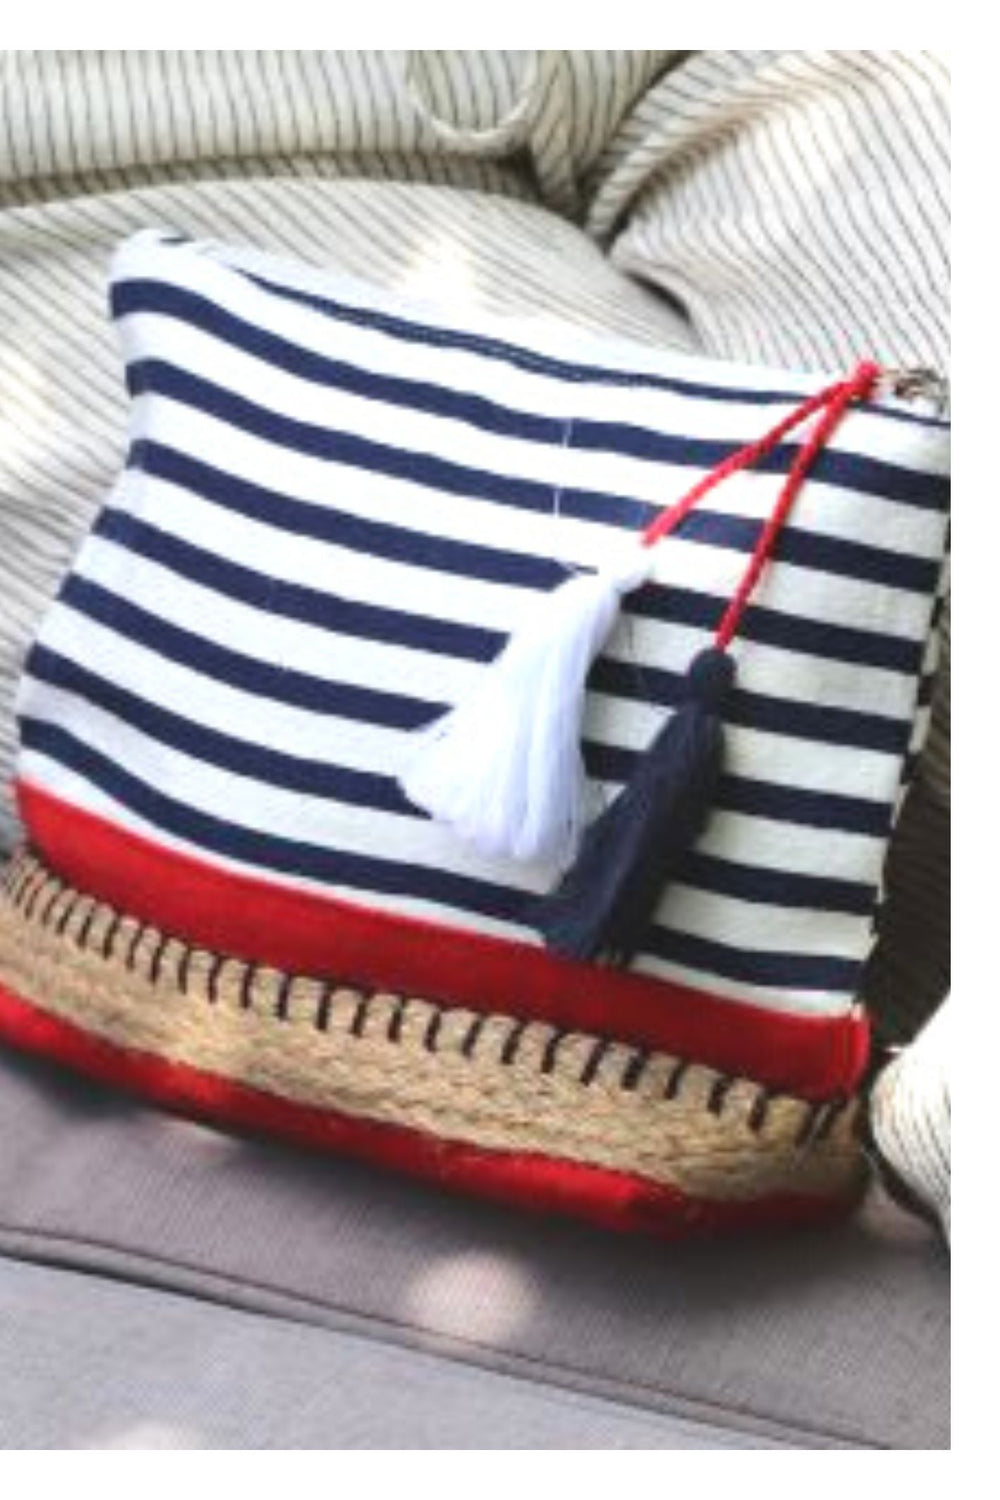 Navy White Striped Wash Bag With Red Base - Sugarplum Boutique